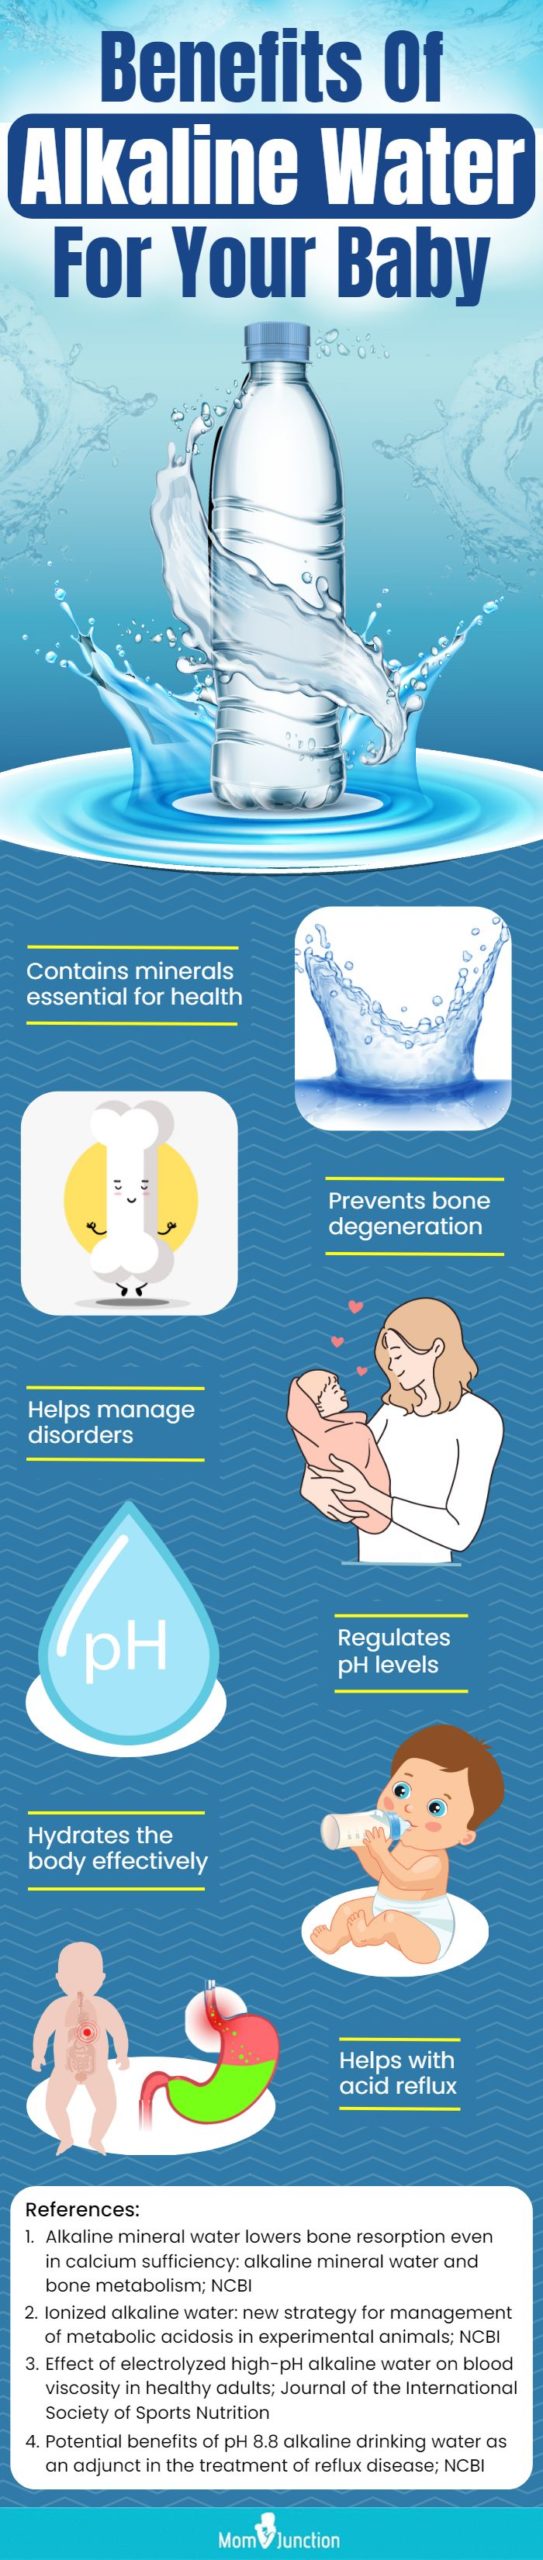 benefits of alkaline water for your baby (infographic)